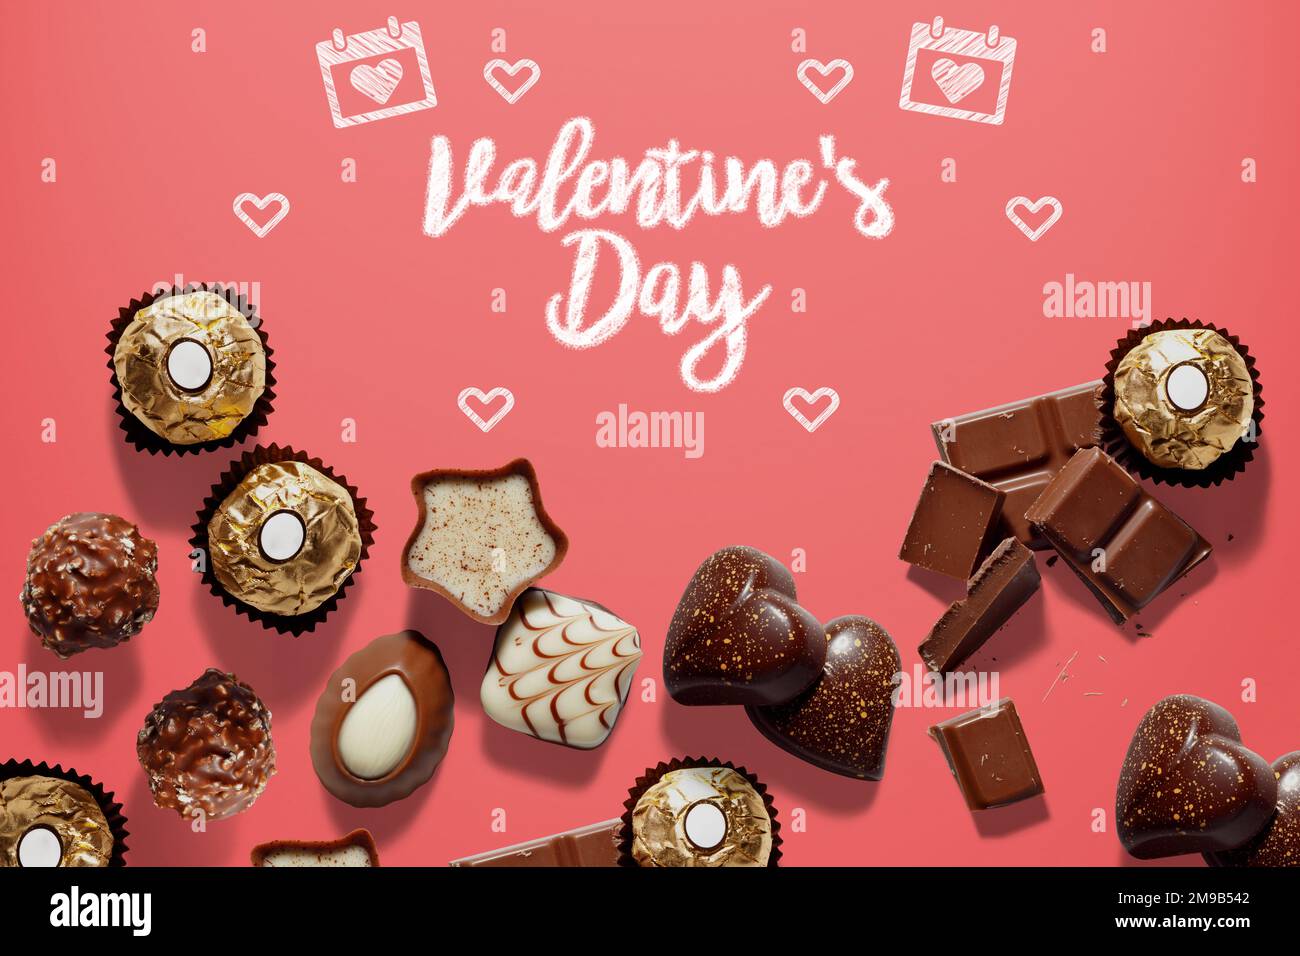 Background with chocolates for valentines day Stock Photo